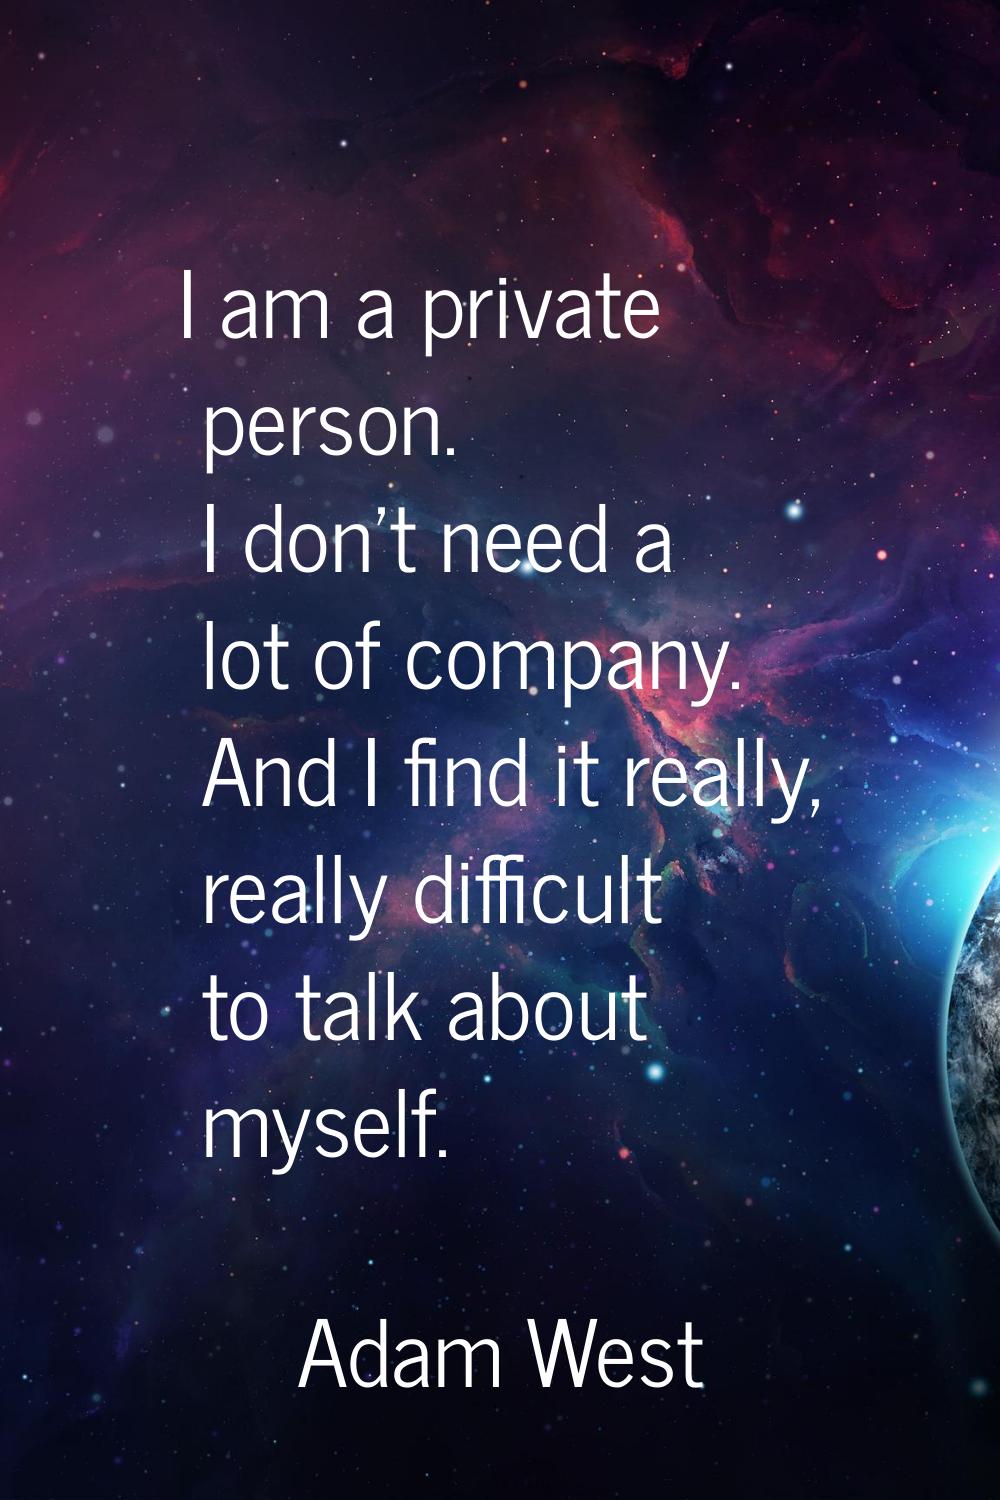 I am a private person. I don't need a lot of company. And I find it really, really difficult to tal